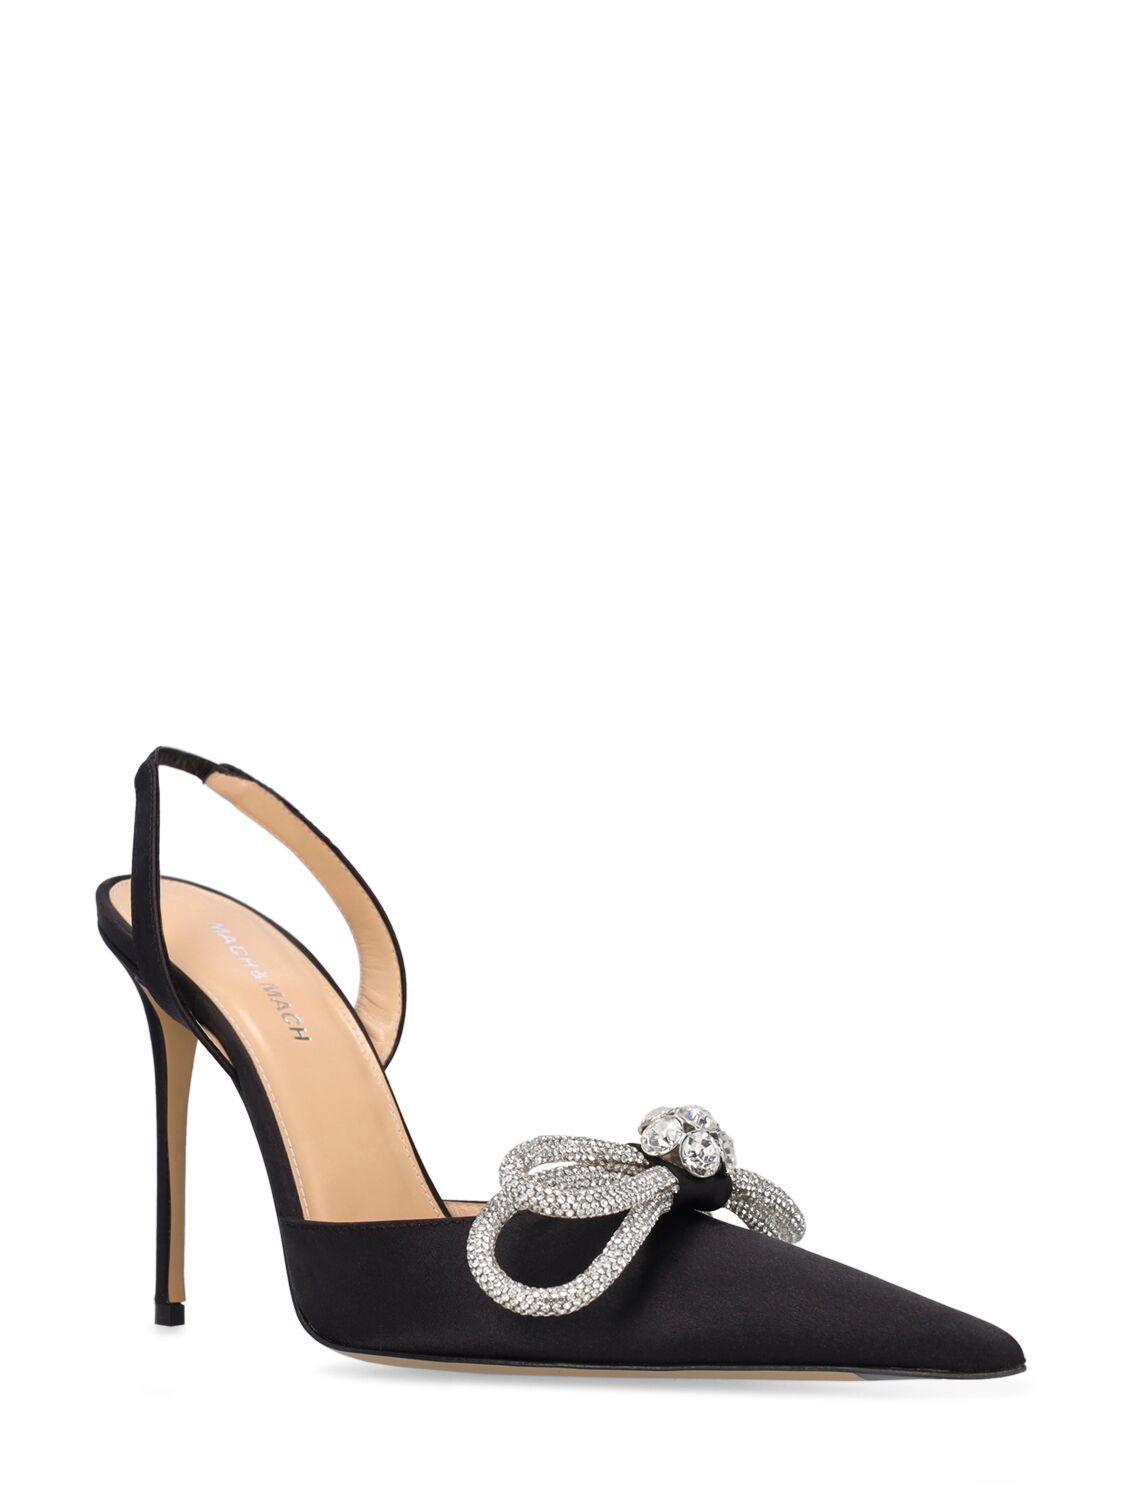 Shop Mach & Mach 110mm Double Bow Satin Slingback Pumps In Black